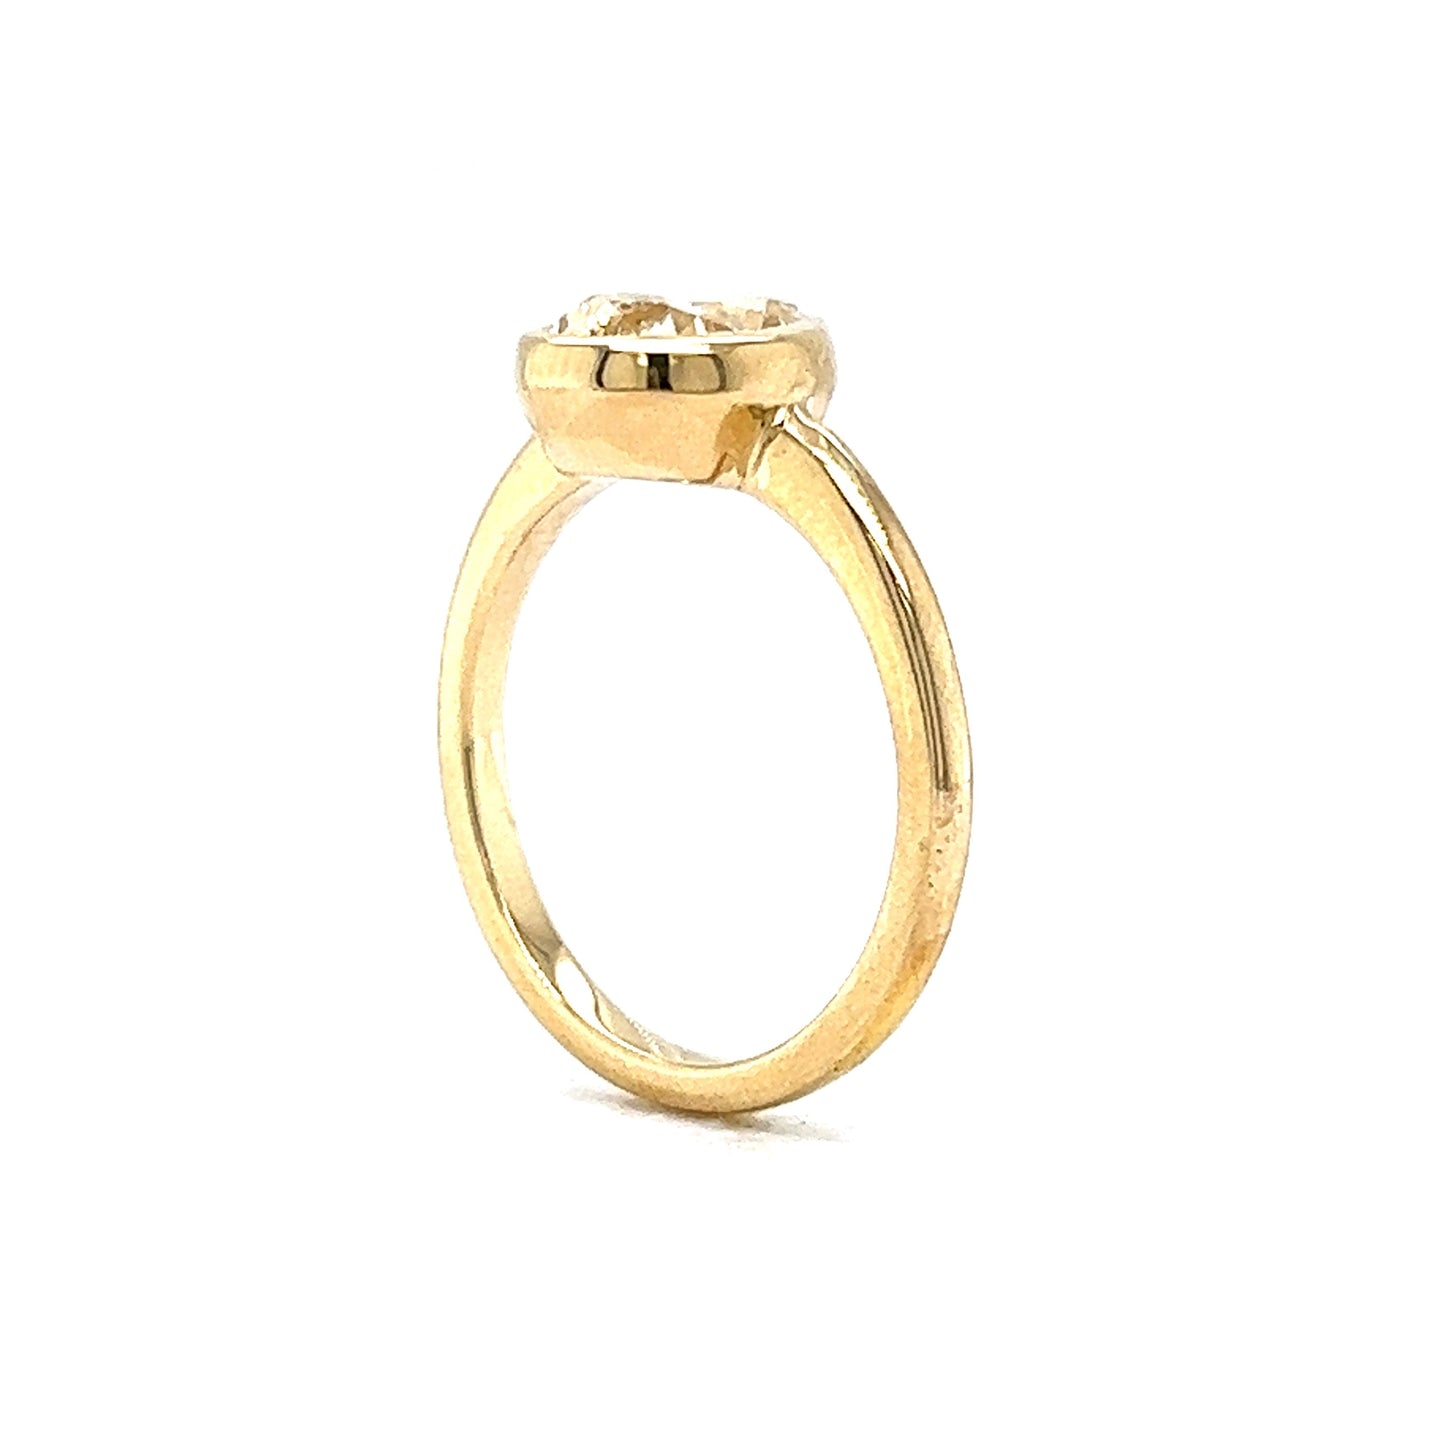 1.51 Light Yellow Pear Cut Diamond Engagement Ring in 14k Yellow Gold